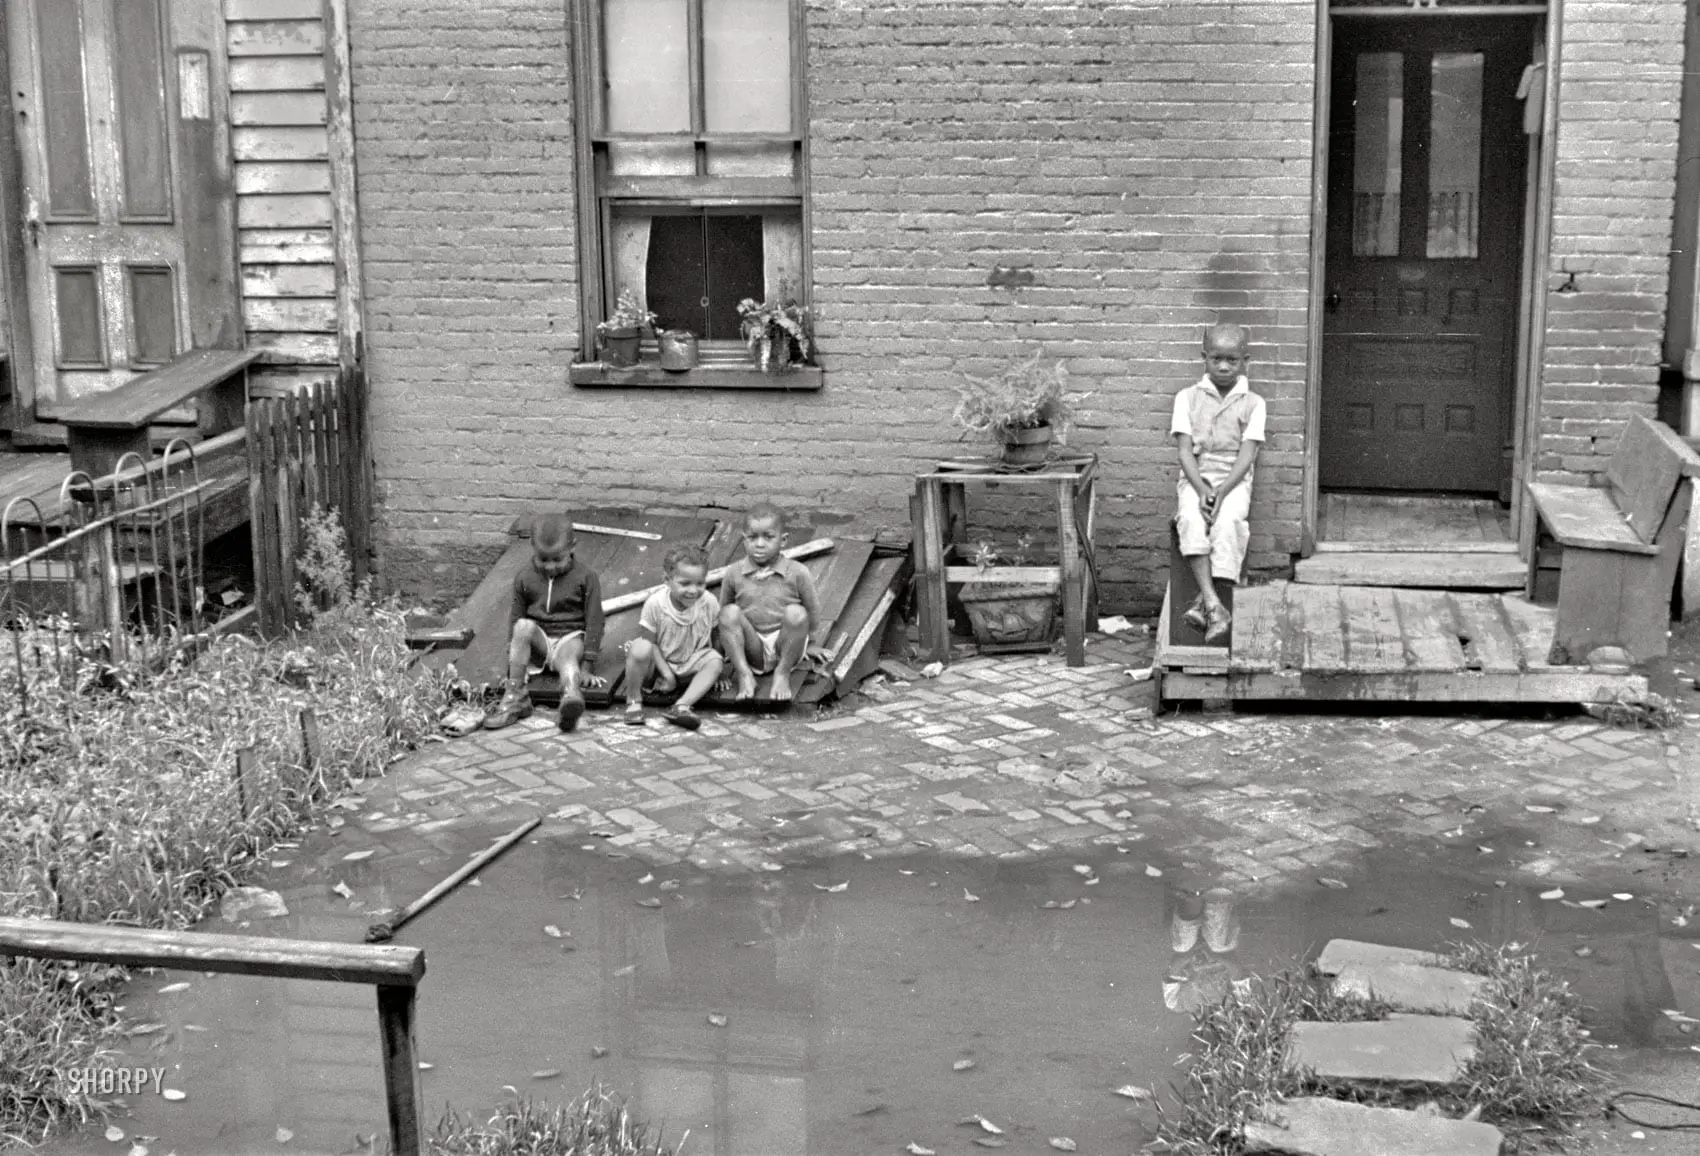 September 1935. A closeup of the Washington, D.C., row house seen here over the weekend. "Front of old brick structure in section near Union Station. Land is low here and water collects in front and backyard after a rain and remains for many days. Entrances to privies are usually under water. Interior of homes similar in shabbiness to exterior." 35mm nitrate negative by Carl Mydans for the Resettlement Administration.